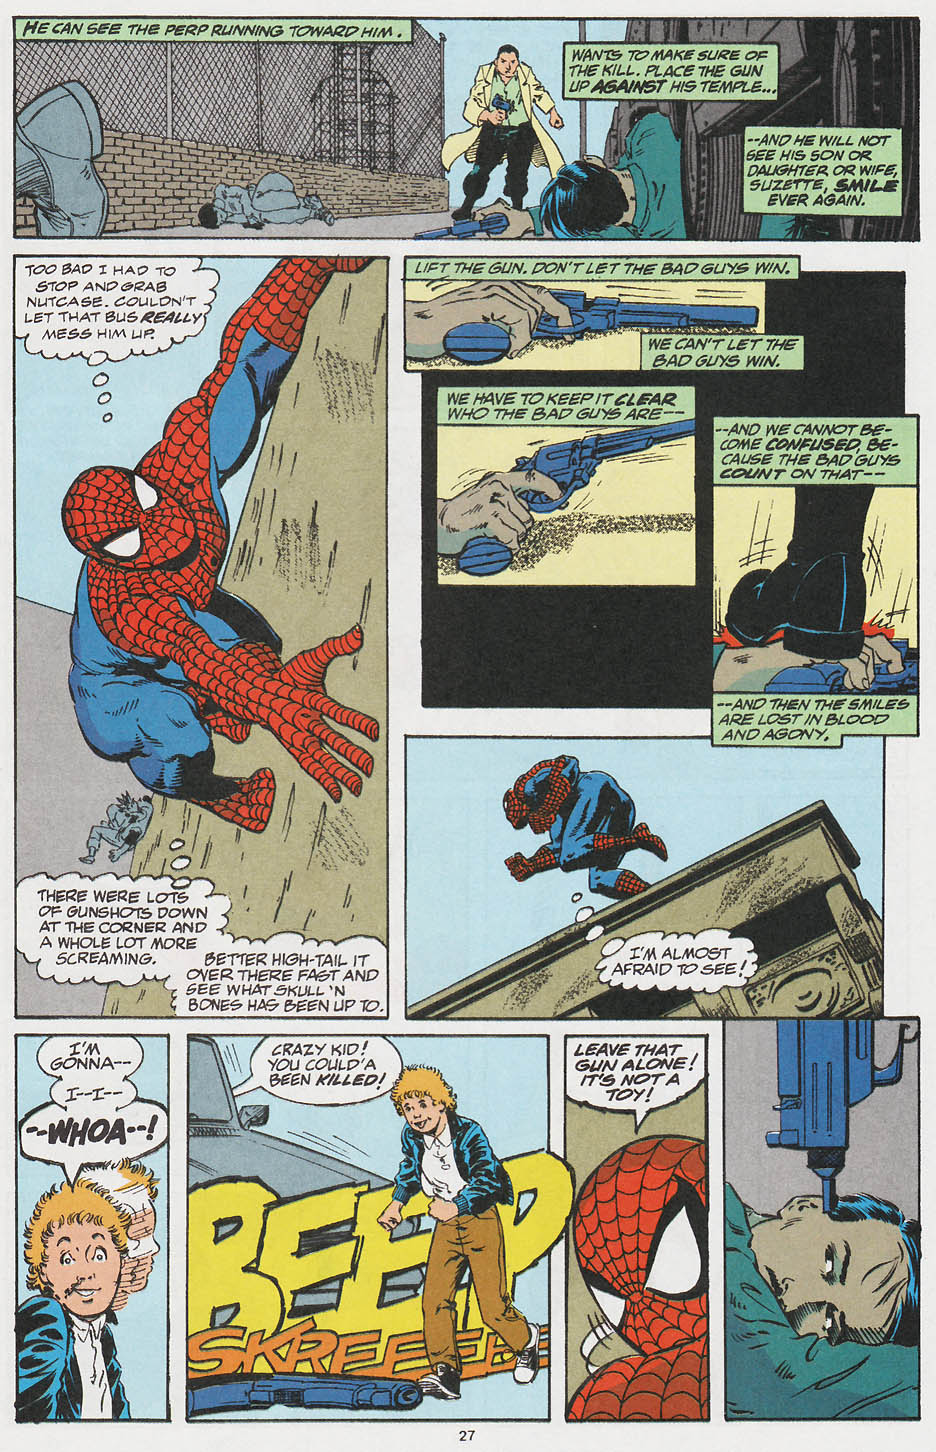 Spider-Man (1990) 27_-_Theres_Something_About_A_Gun_Part_1 Page 20